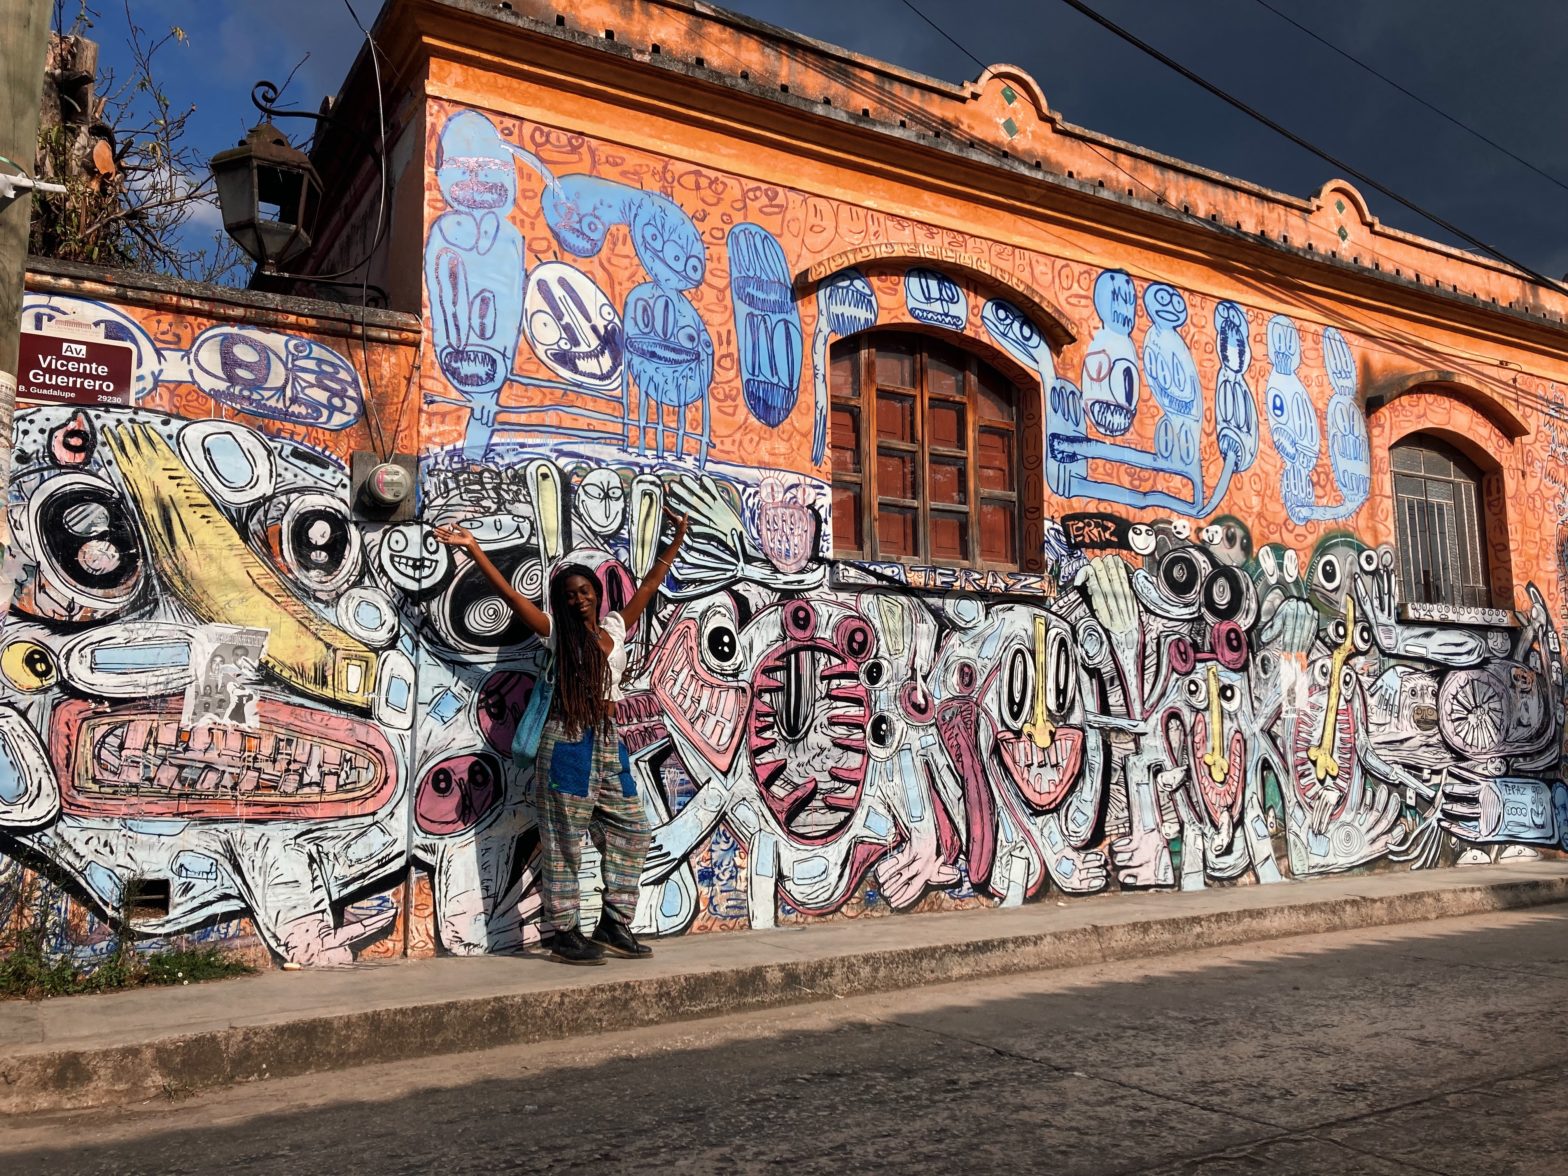 Day In The Life Of A Black Expat: Sunrise To Sunset In San Cristóbal de las Casas, Mexico